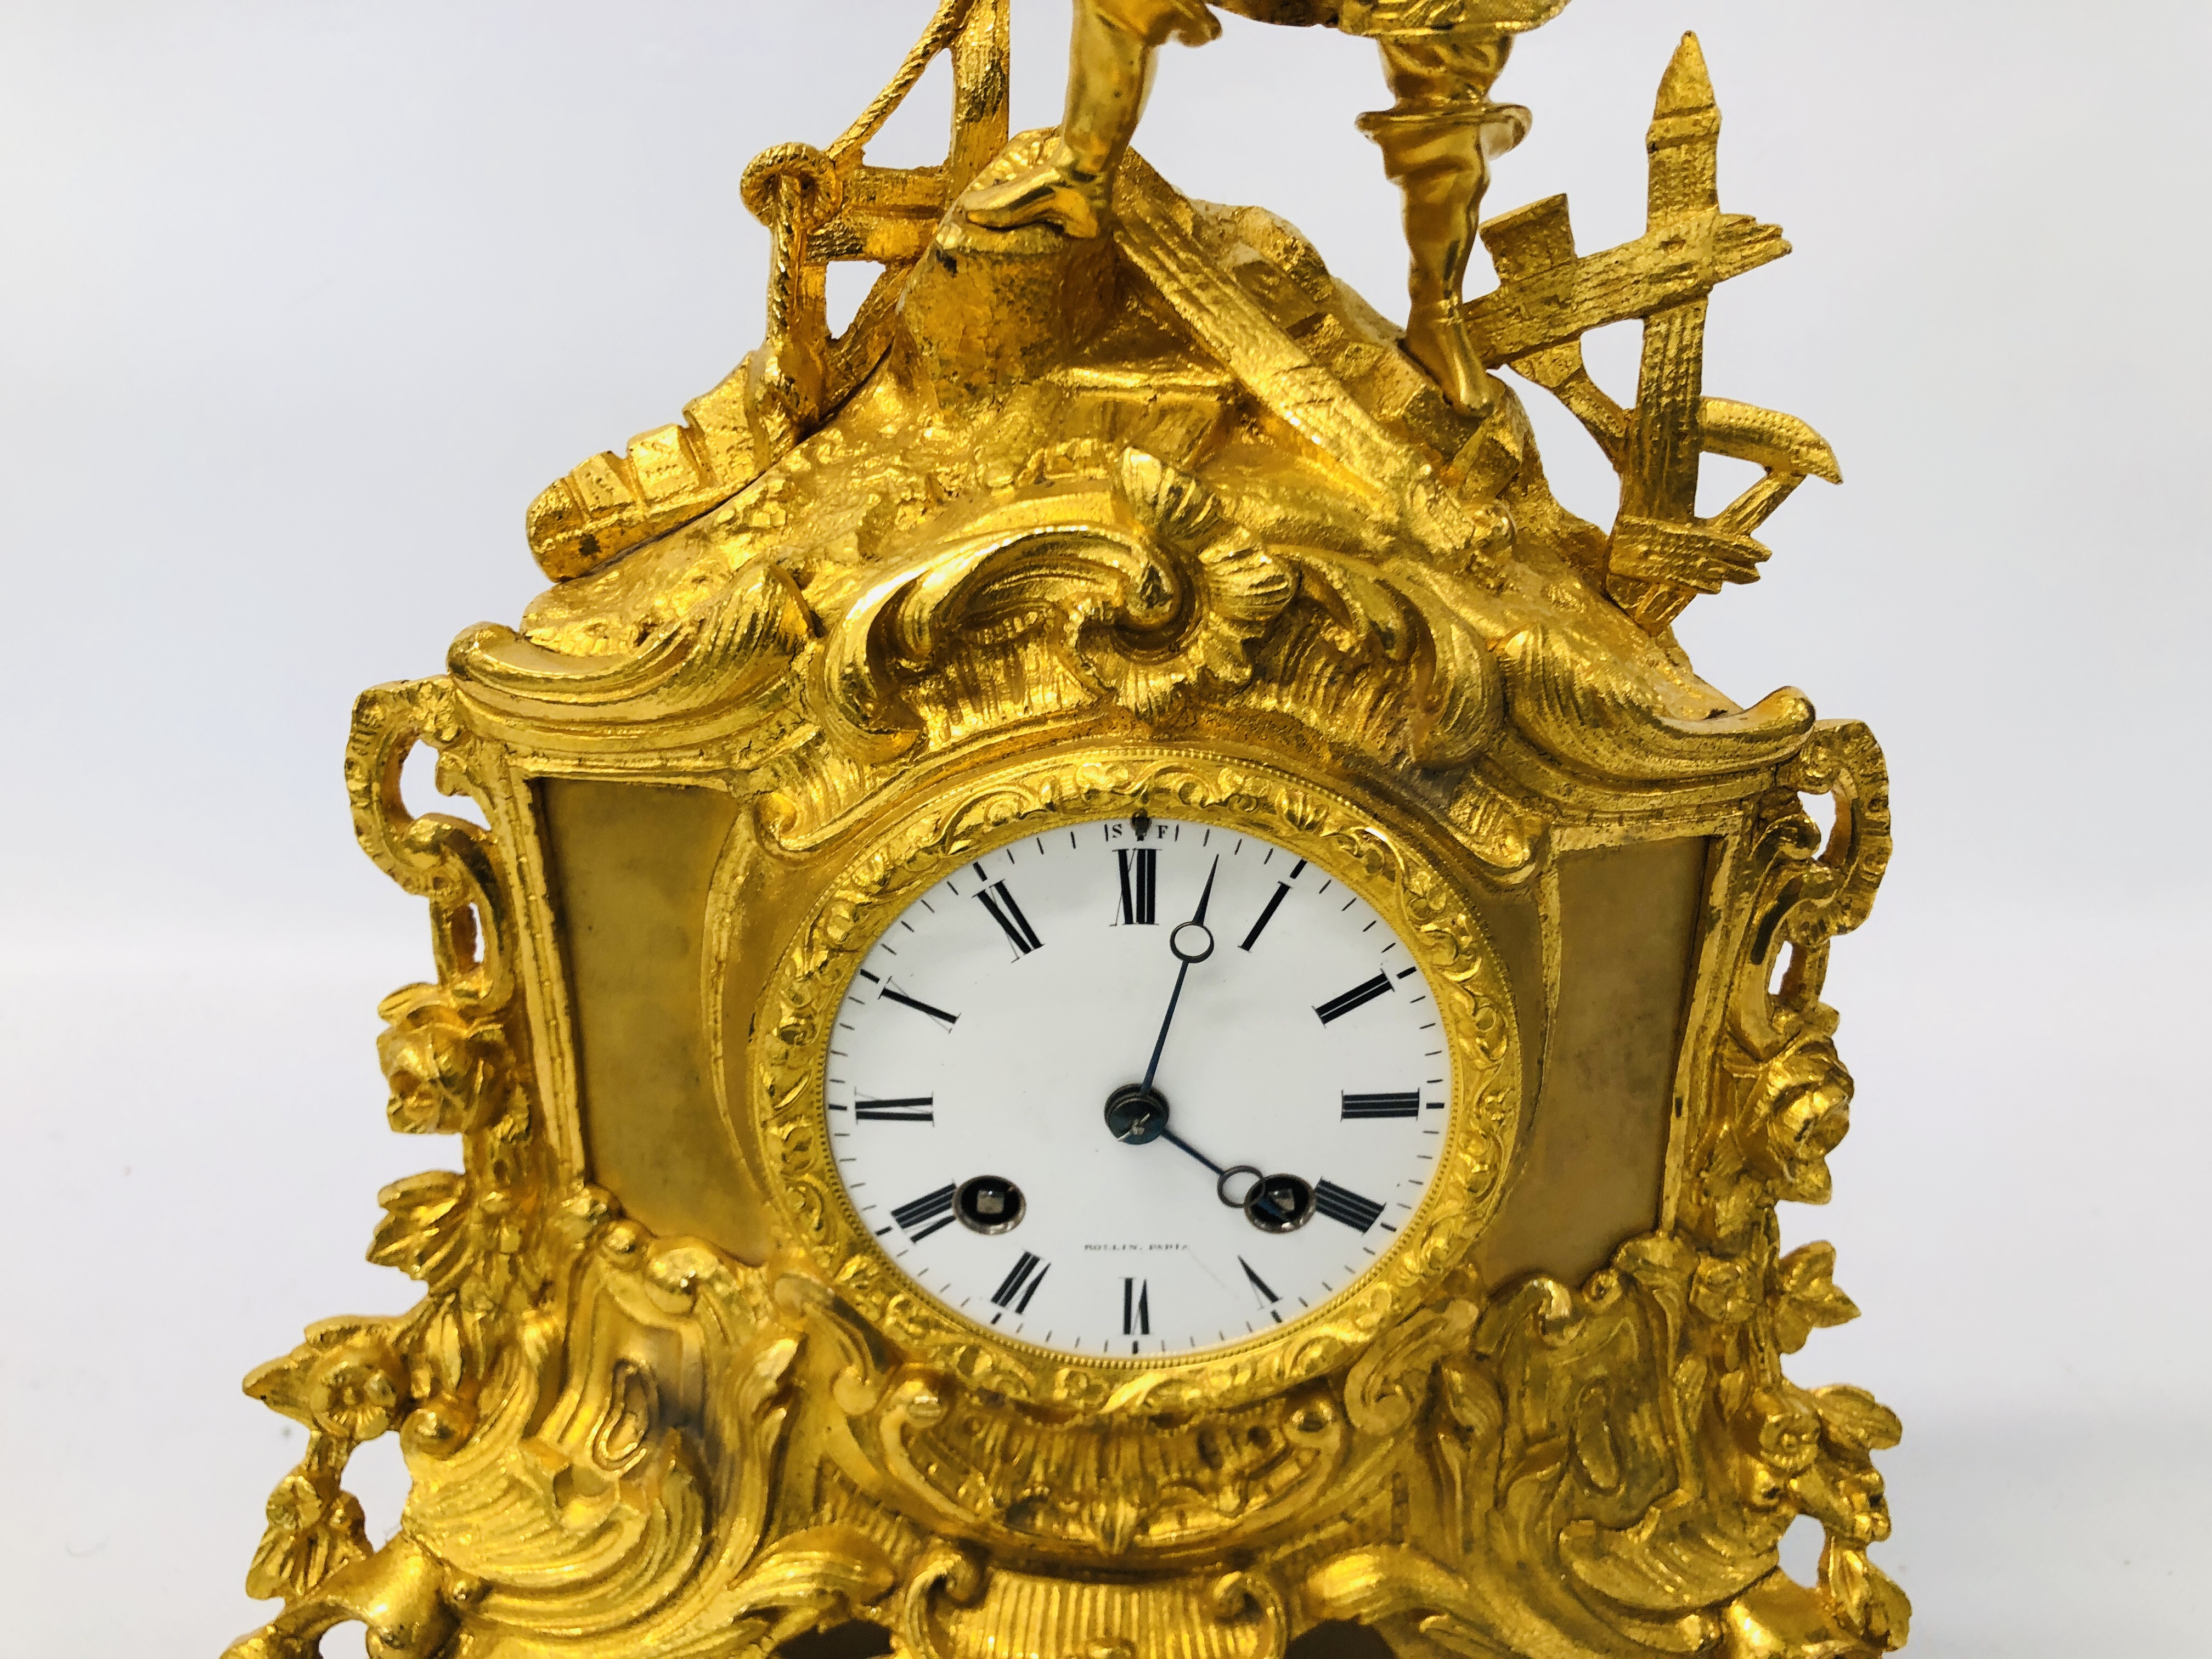 C19TH FRENCH ORMOLU CLOCK MARKED "ROLLIN" PARIS WITH GLASS DOME - Image 4 of 9